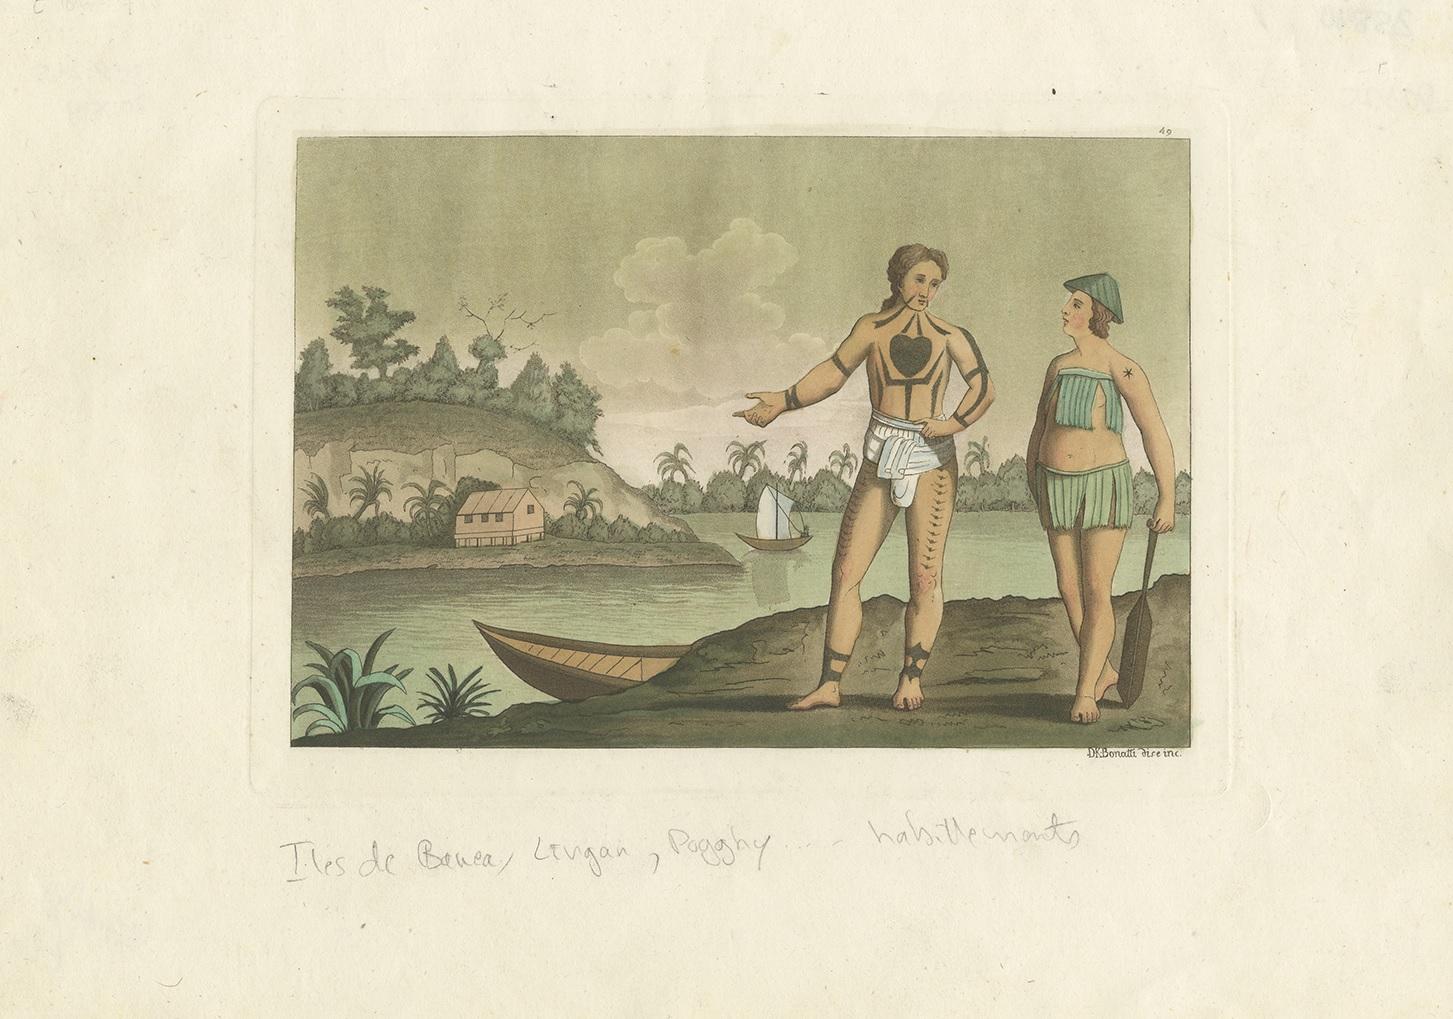 Antique print of inhabitants from Banae (Nagpur India?). Also depicted are a sailing boat and palm trees. 

This print originates from 'Il Costume Antico e Moderno (..)' by G. Ferrario. Giulio Ferrario was founder of the 'Societa Tipografica de